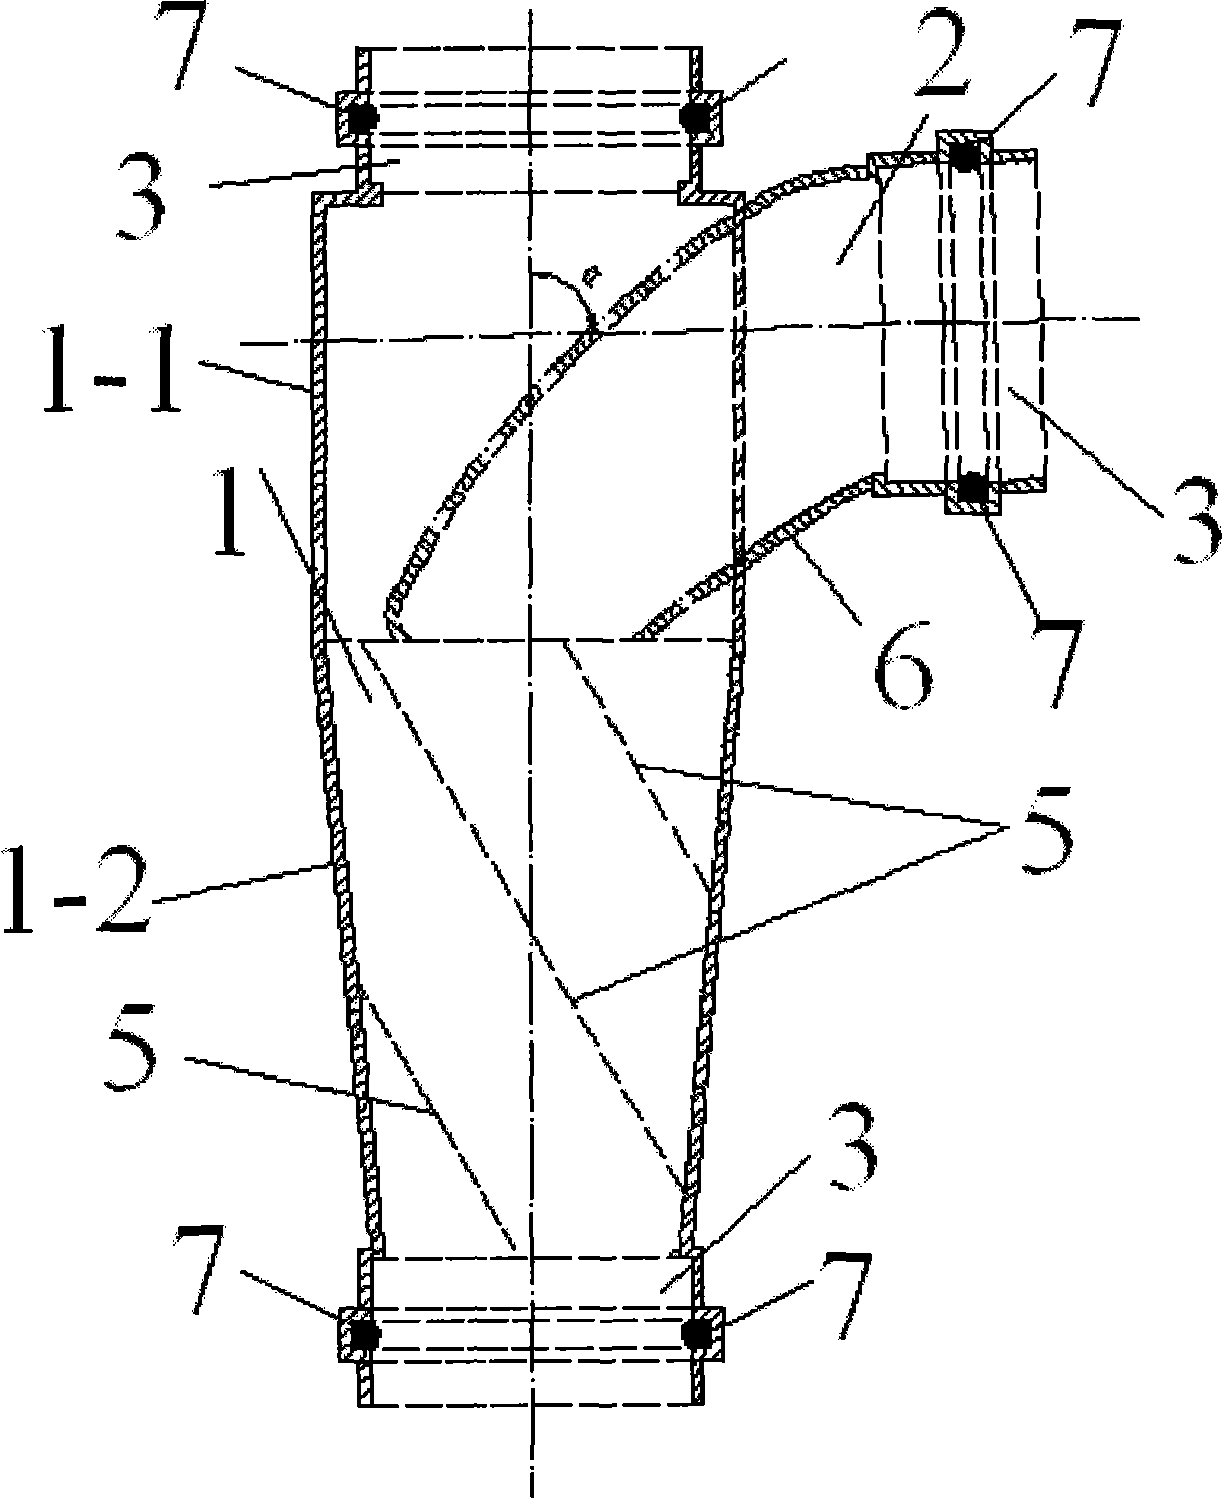 Water draining tee capable of generating rotational flow